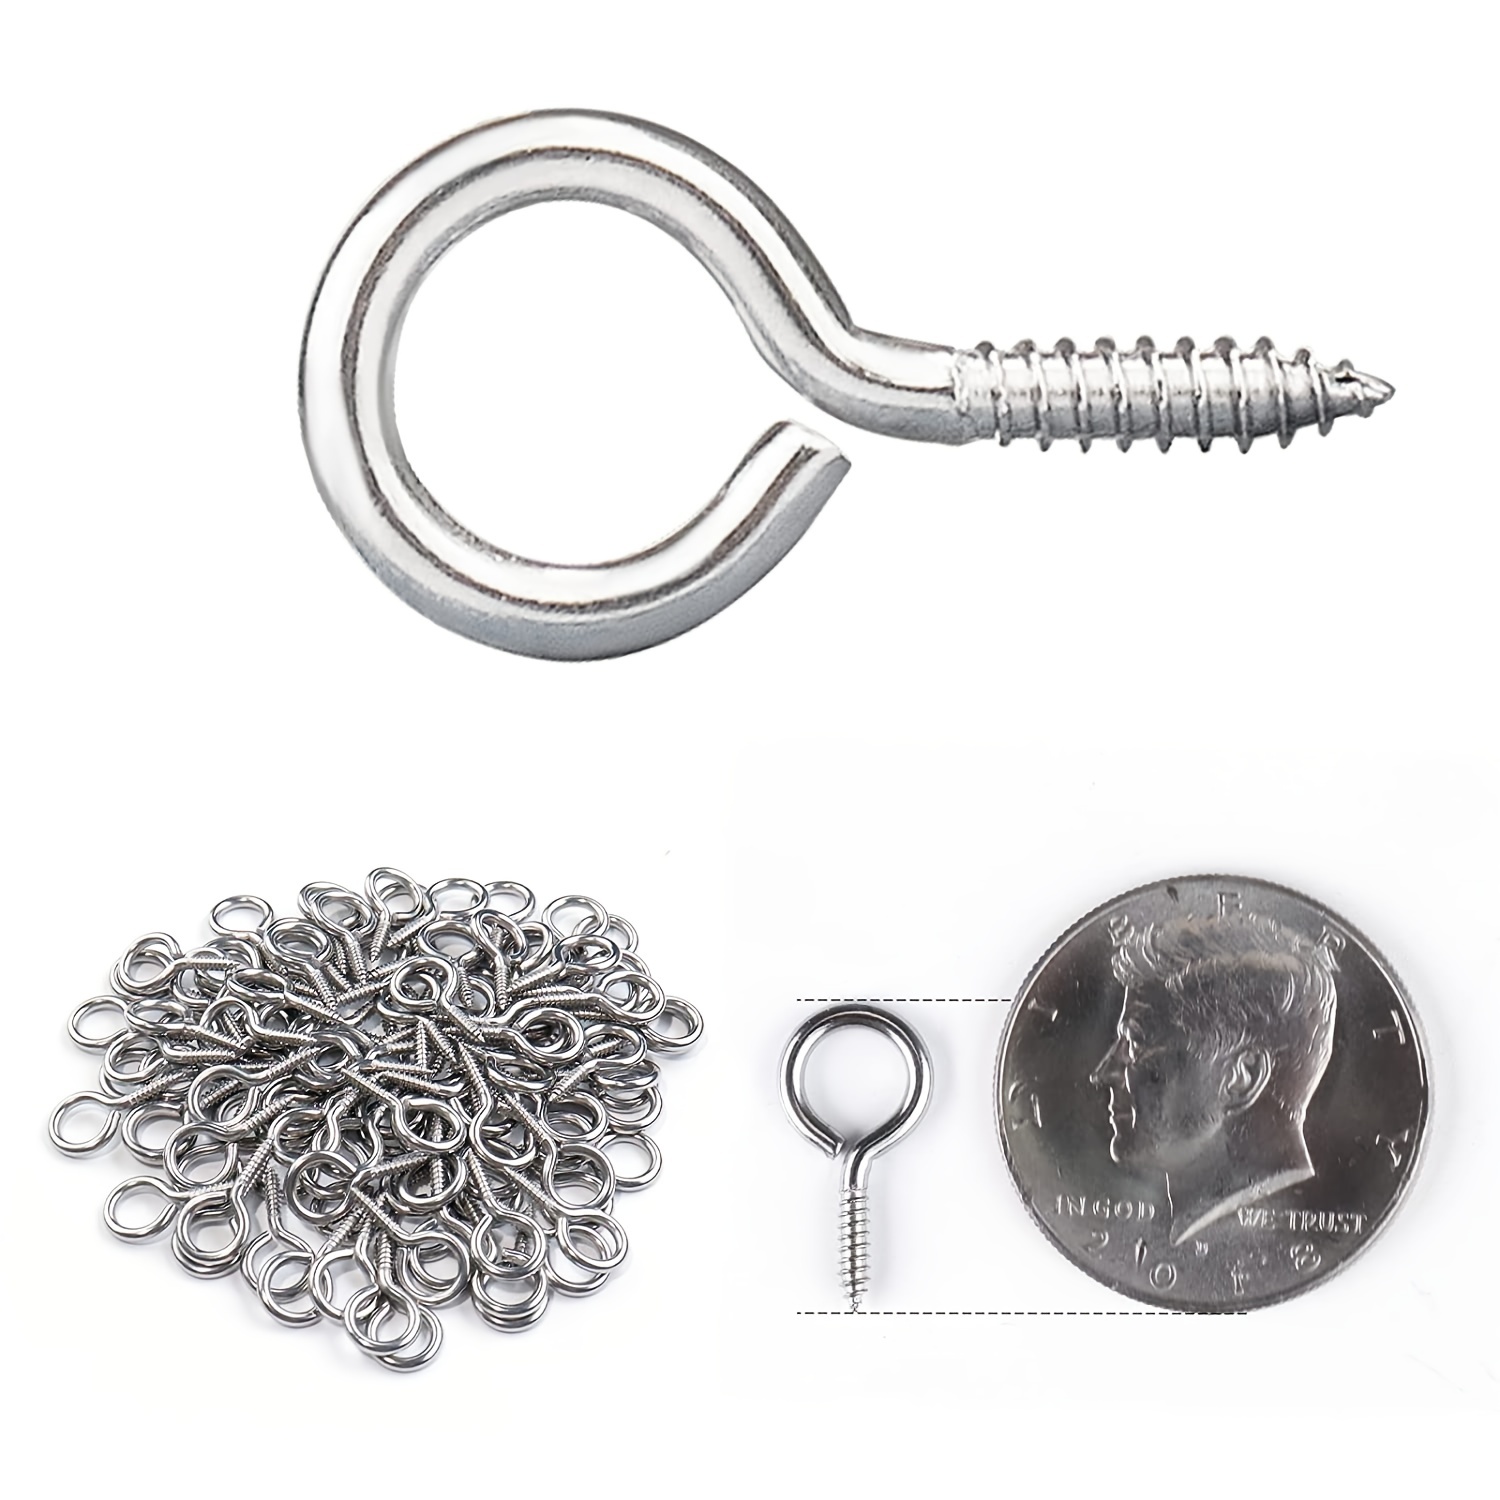  2 Inch Metal Cup Hook Round End Screw Hook Self Tapping  Screw Hook Silver 50Pcs